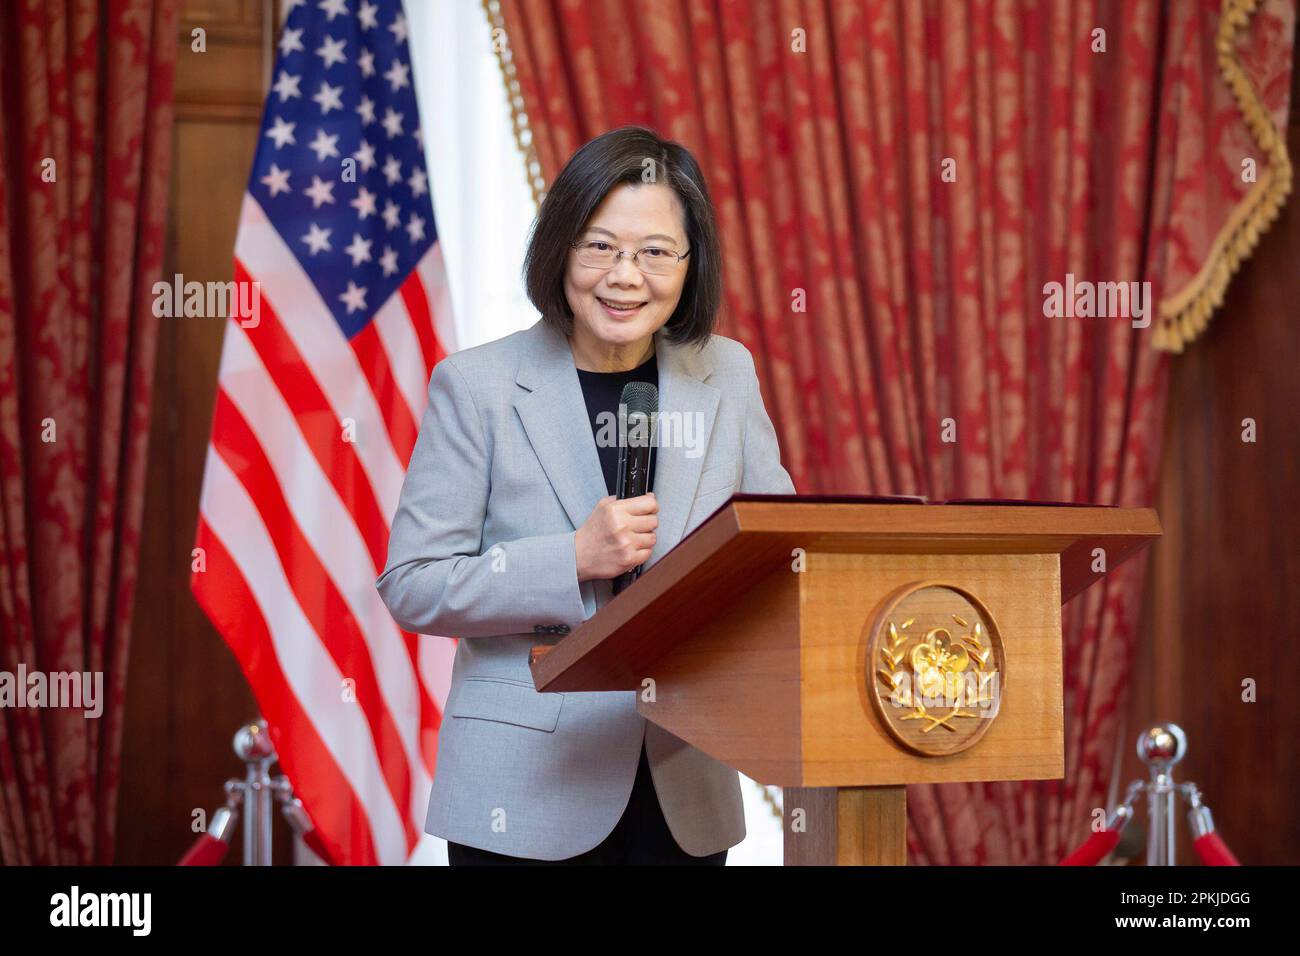 In this photo released by the Taiwan Presidential Office, Taiwan's President Tsai Ing-wen, speaks at a luncheon during a visit by a Congressional delegation to Taiwan in Taipei, Taiwan, Saturday, April 8, 2023. China sent warships and dozens of fighter jets toward Taiwan on Saturday, the Taiwanese government said, in retaliation for a meeting between the U.S. House of Representatives speaker and the president of the self-ruled island democracy claimed by Beijing as part of its territory. (Taiwan Presidential Office via AP) Stock Photo